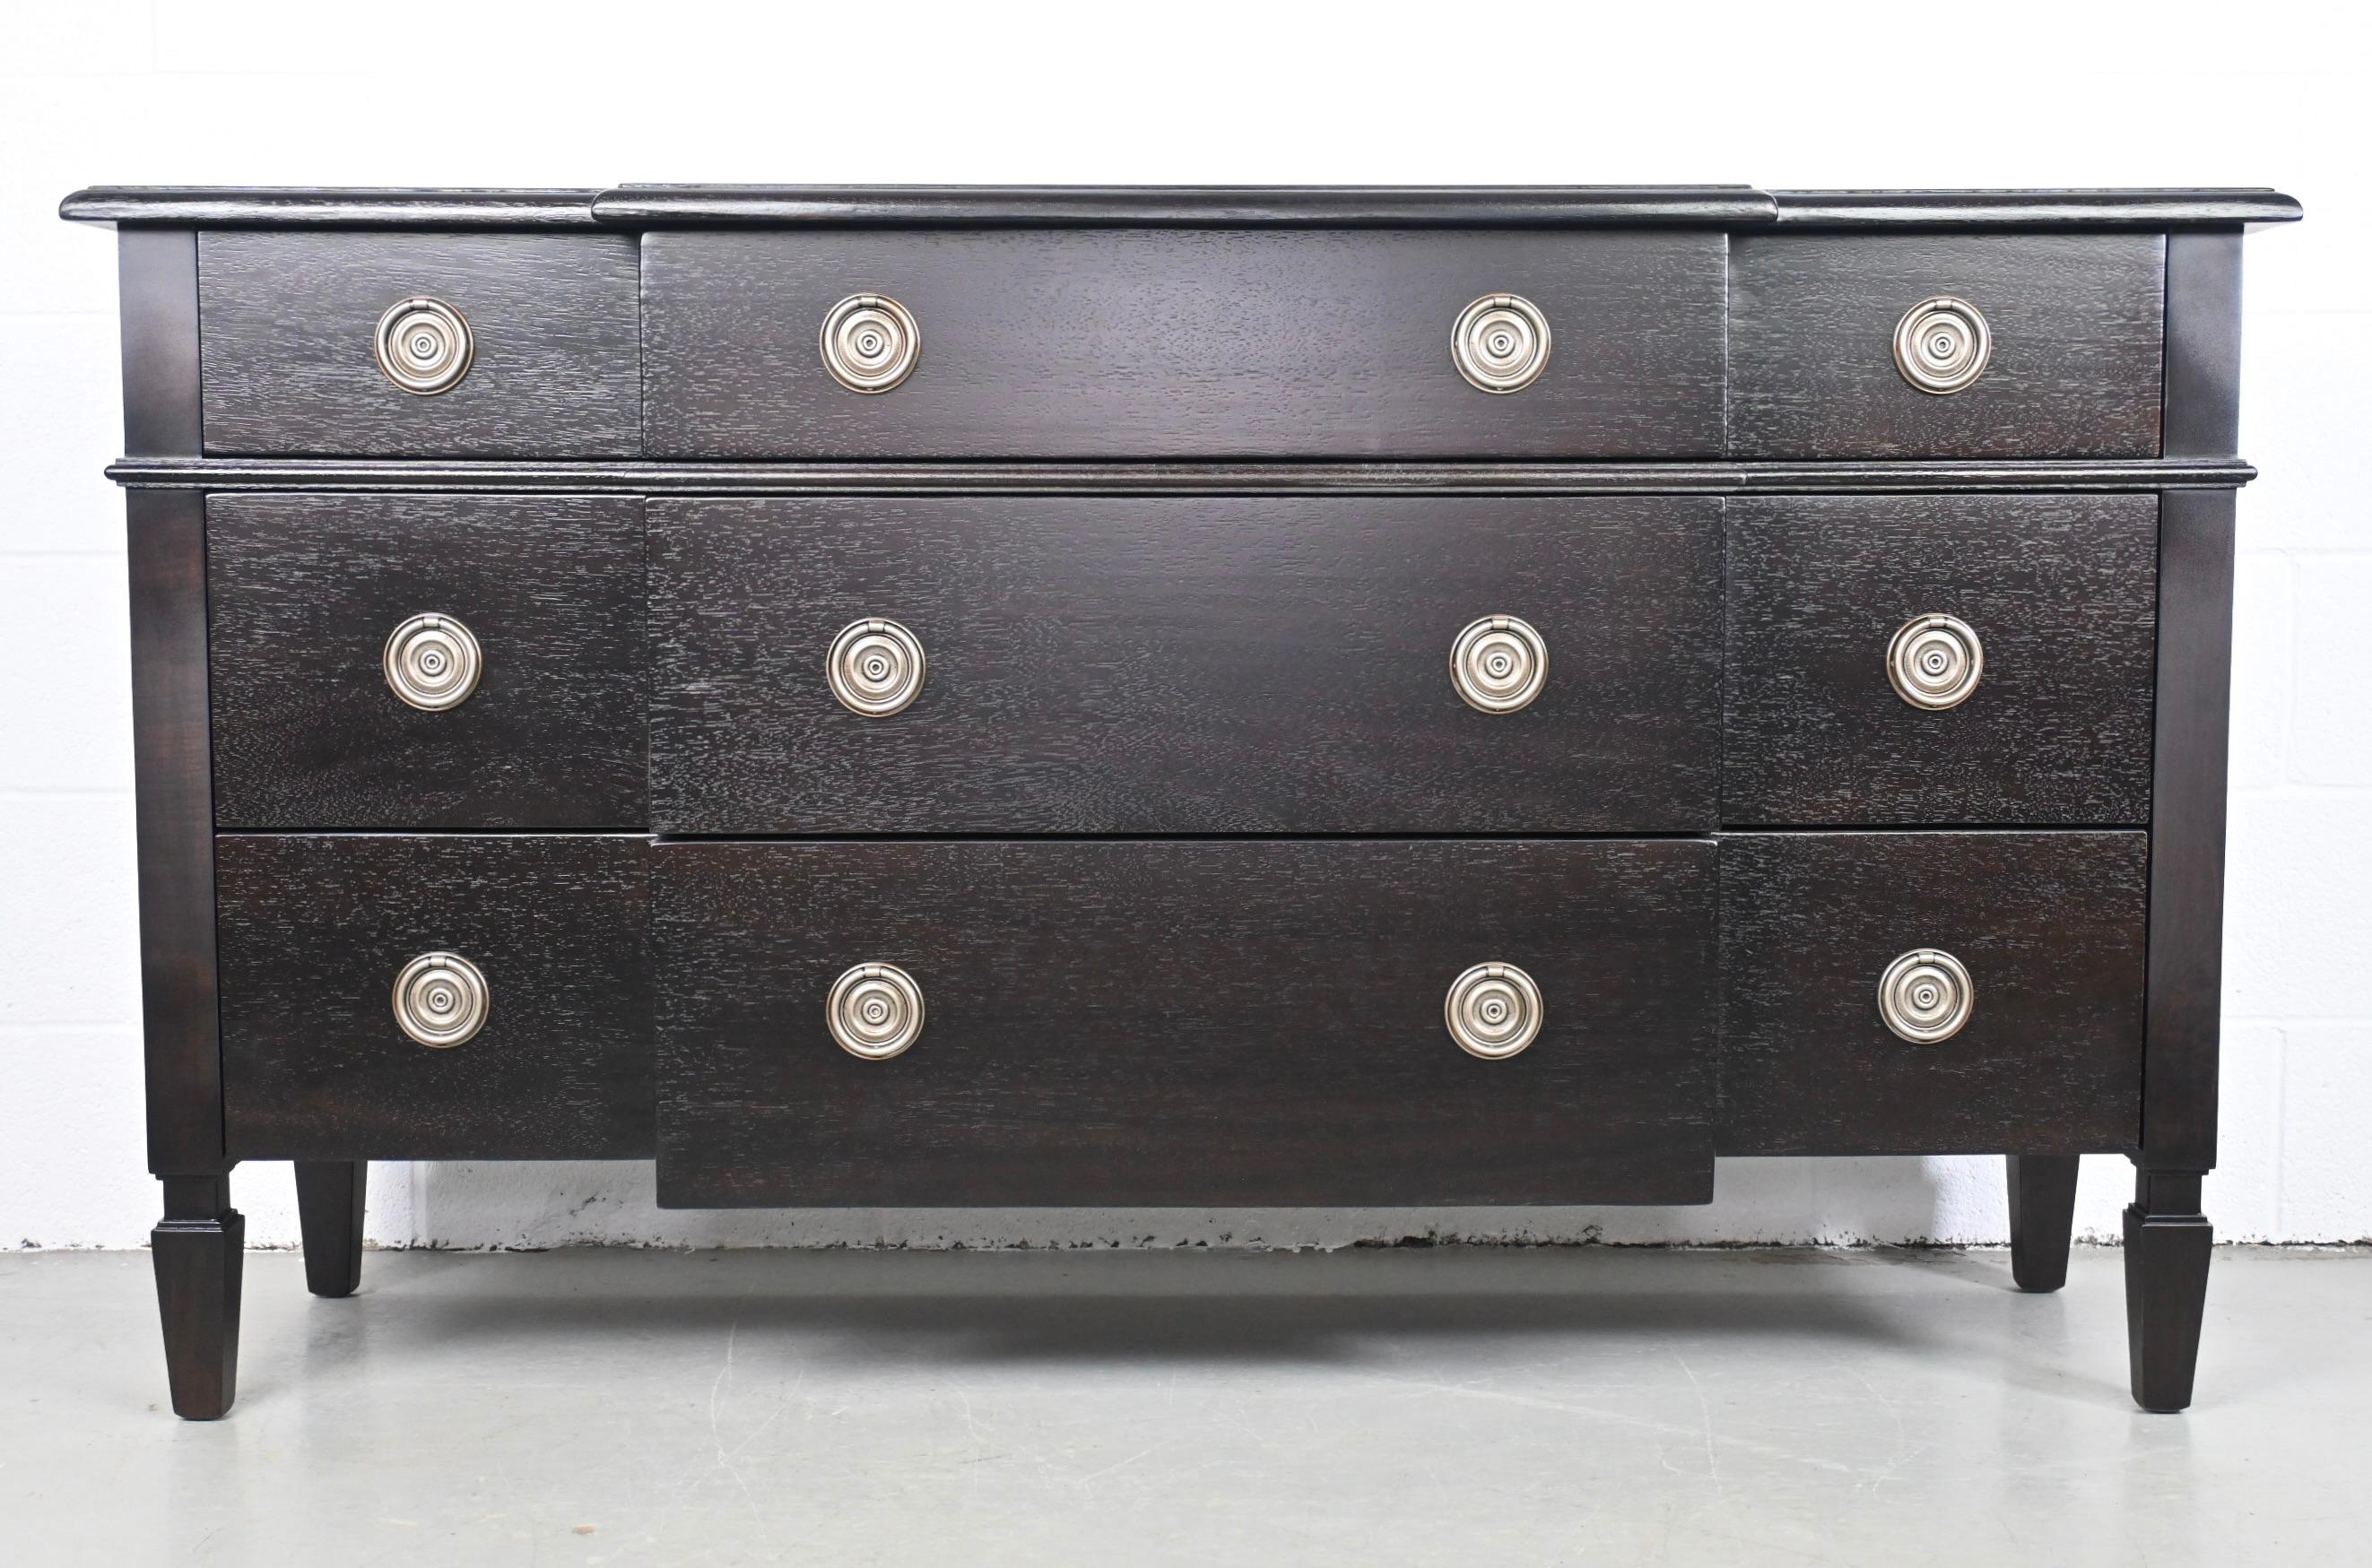 Barbara Barry for Milling Road Dark Maple dresser or credenza

Milling Road Baker Furniture, Italy, 1990s

Measures: 59.5 Wide x 19.25 Deep x 34.38 High.

Three-drawer dresser or credenza with manufacturer lined drawers.

Professionally